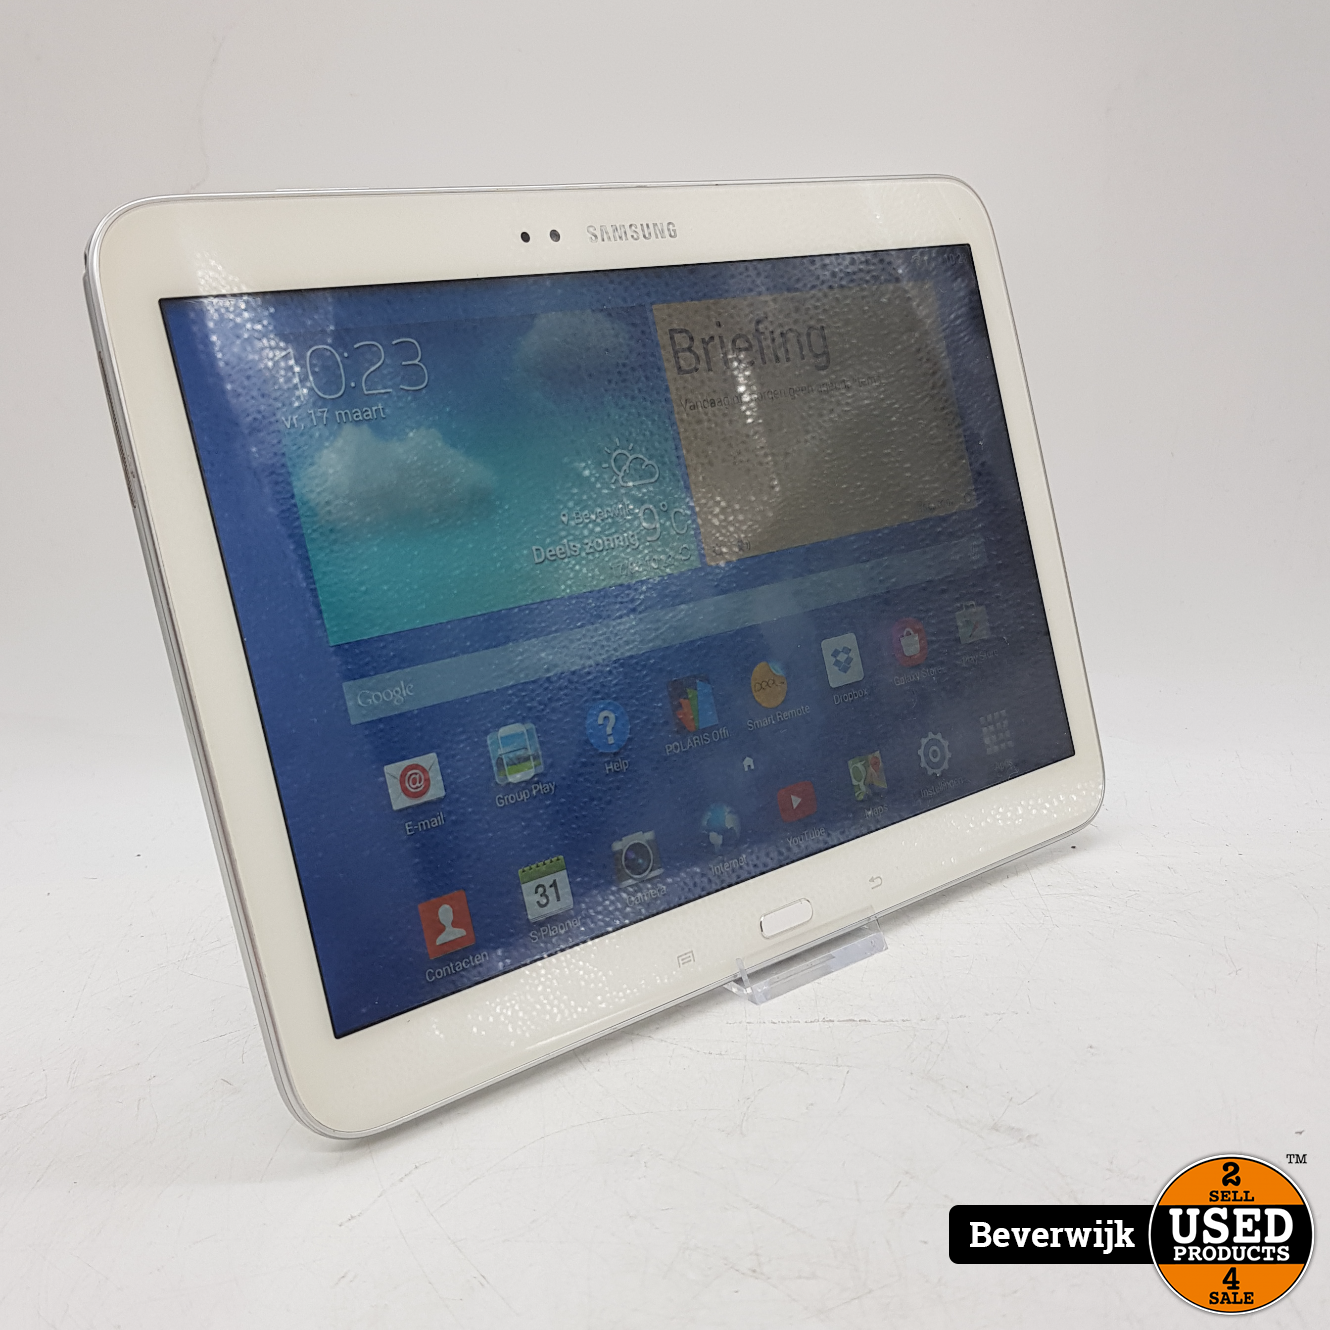 Pilfer klimaat optioneel 18-03 Samsung Galaxy Tab 3 16GB Android 4 10 inch in Goede staat - Used  Products Beverwijk